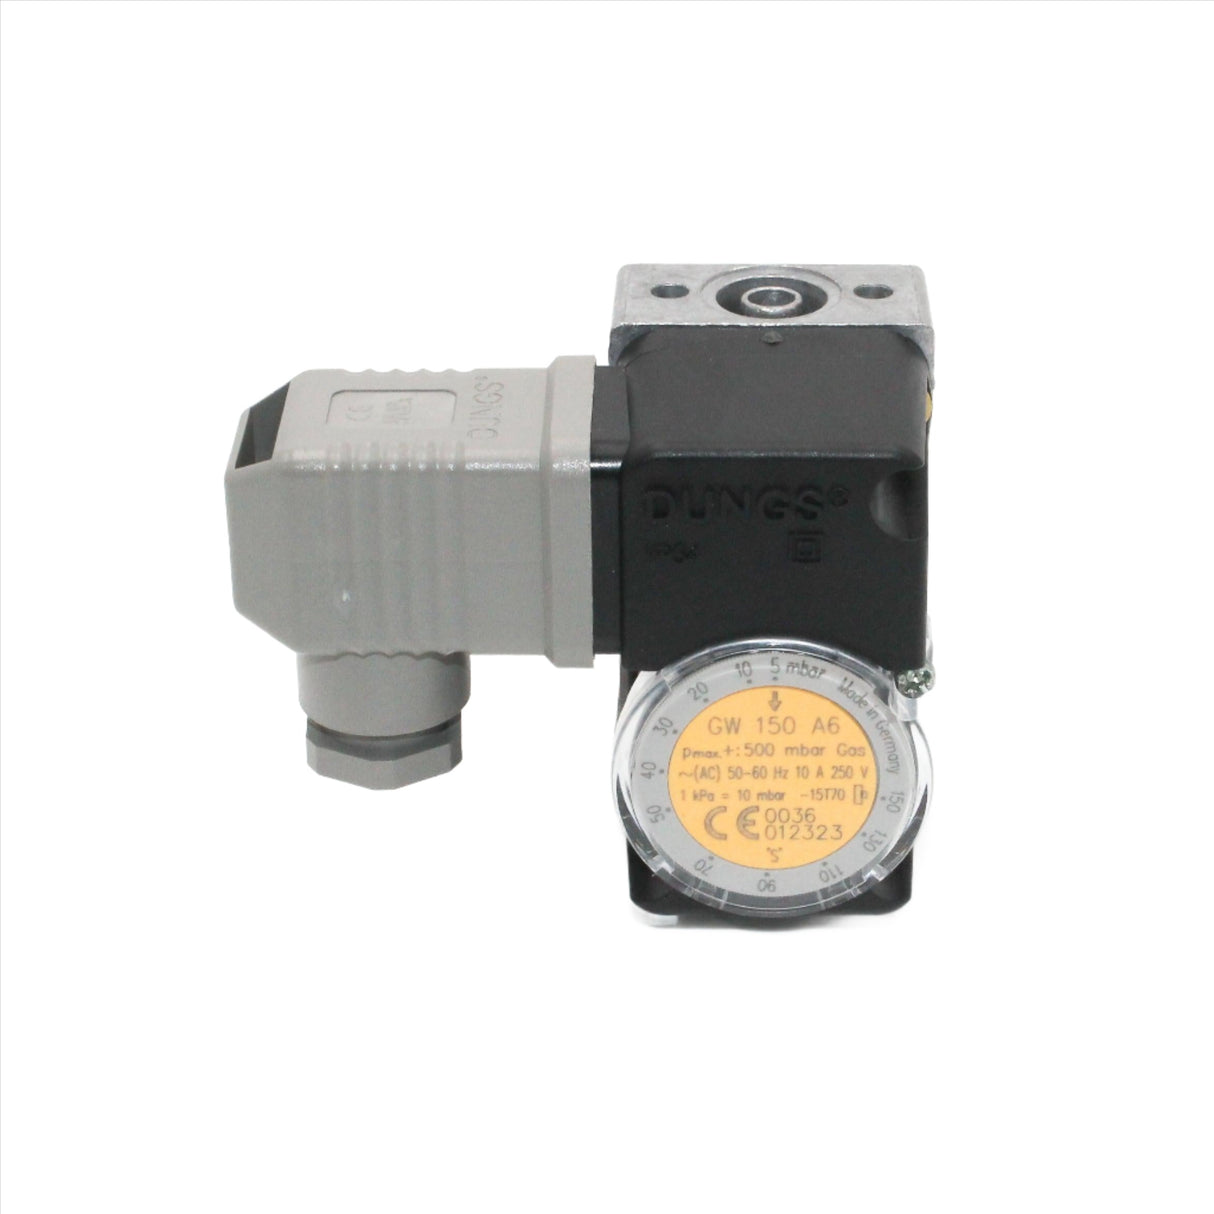 Dungs GW10 A6 2-10 mbar Compact Pressure Switch